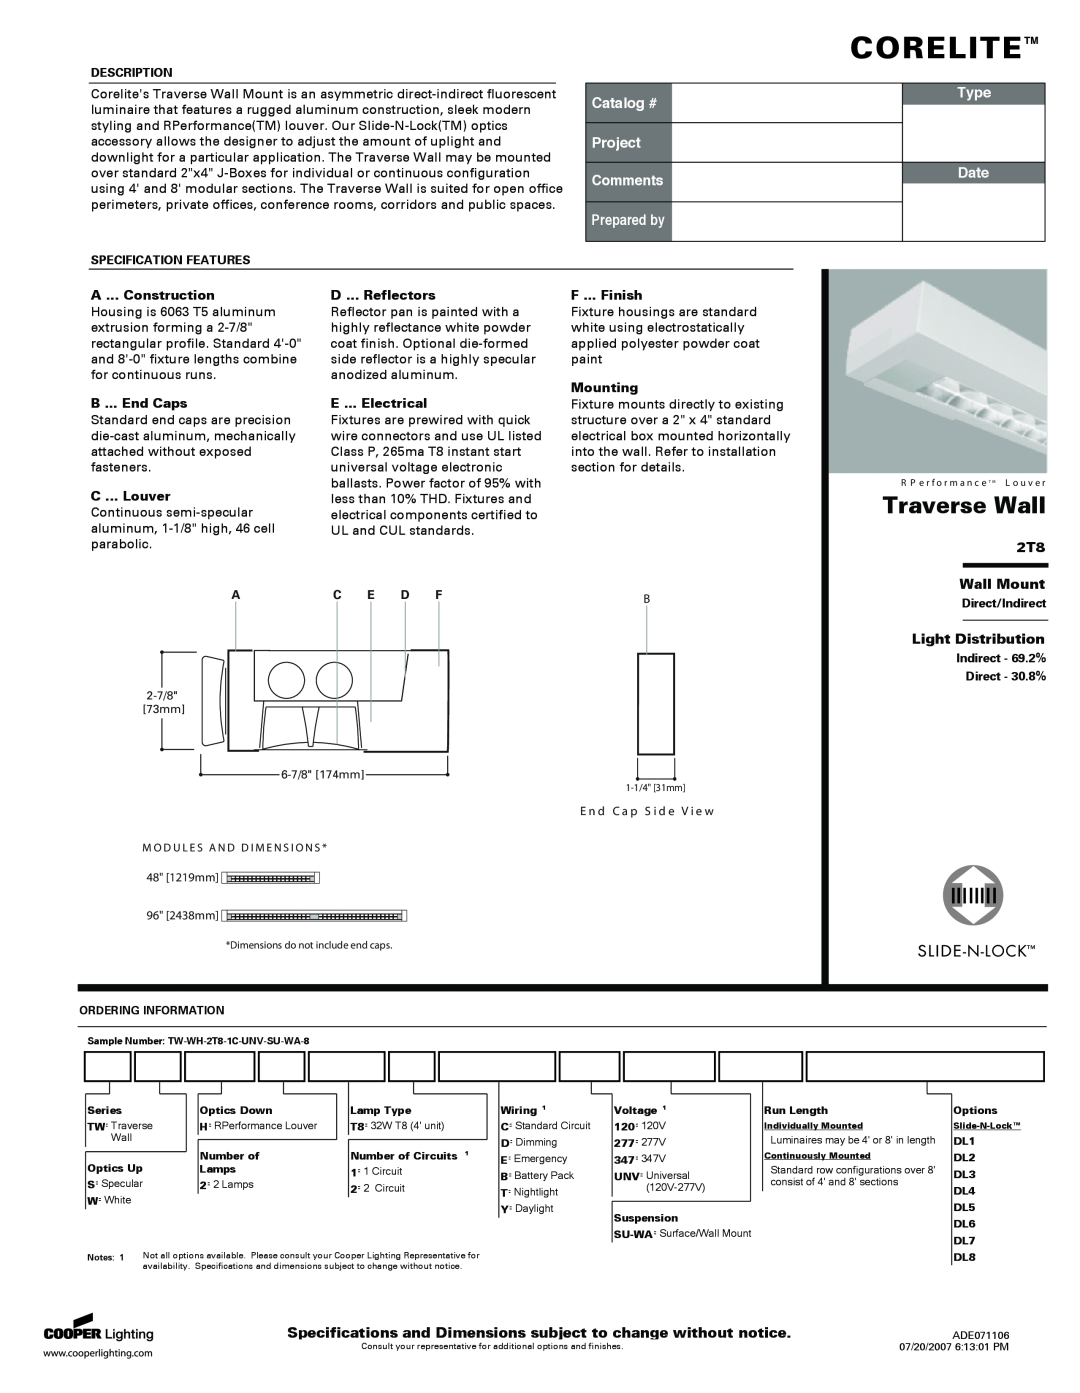 Cooper Lighting specifications 2T8 Wall Mount, Light Distribution, Corelite, Traverse Wall, Catalog #, Project Comments 